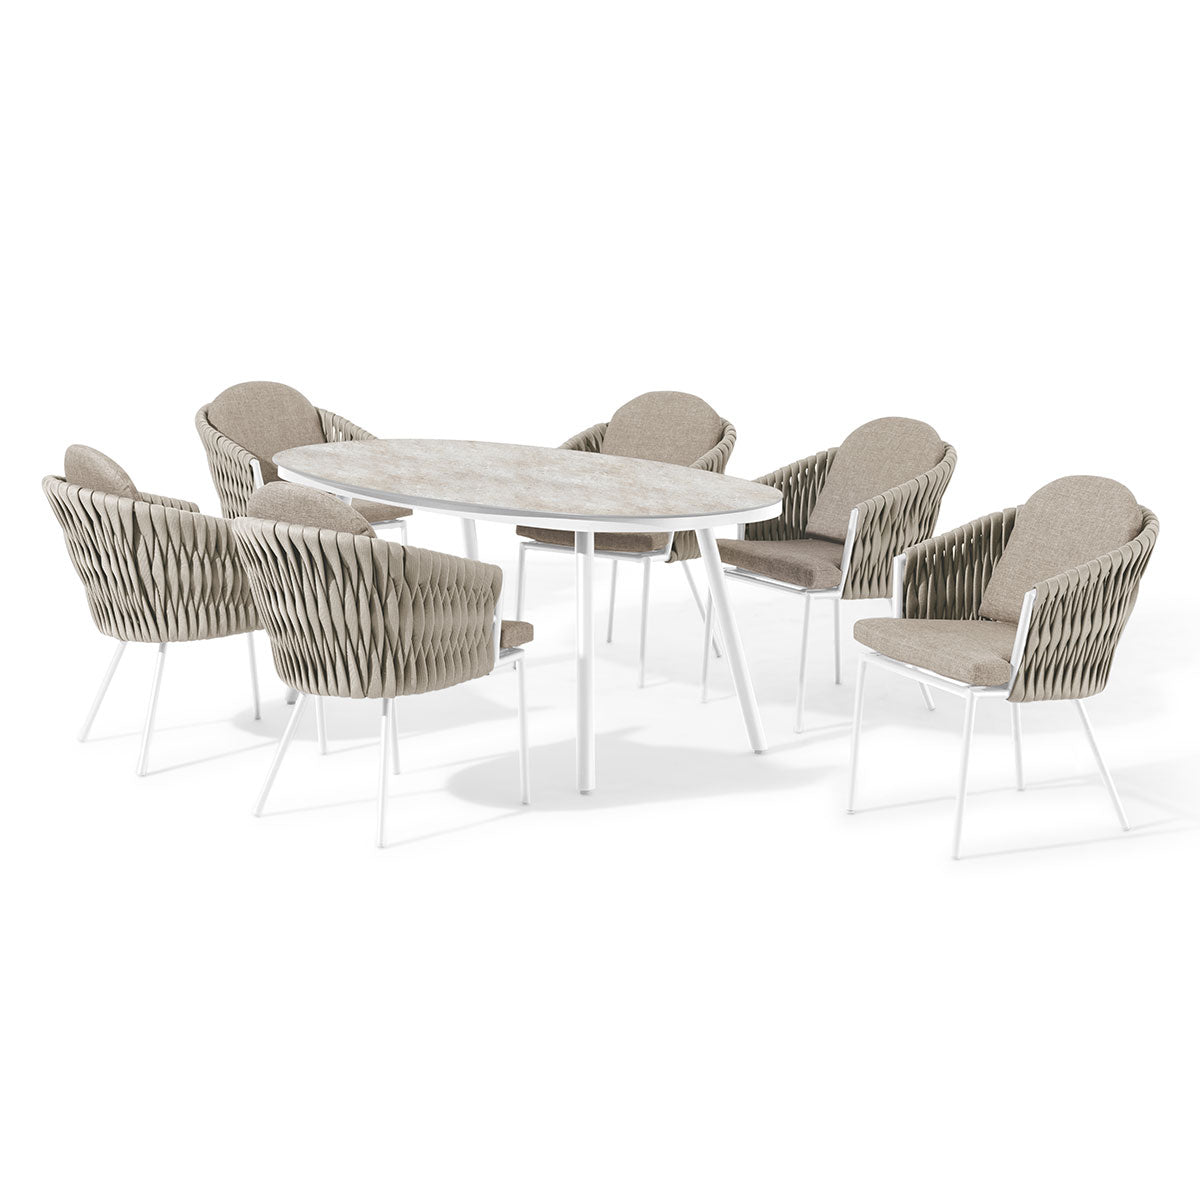 Marina 6 Seat Oval Rope Weave Dining Set